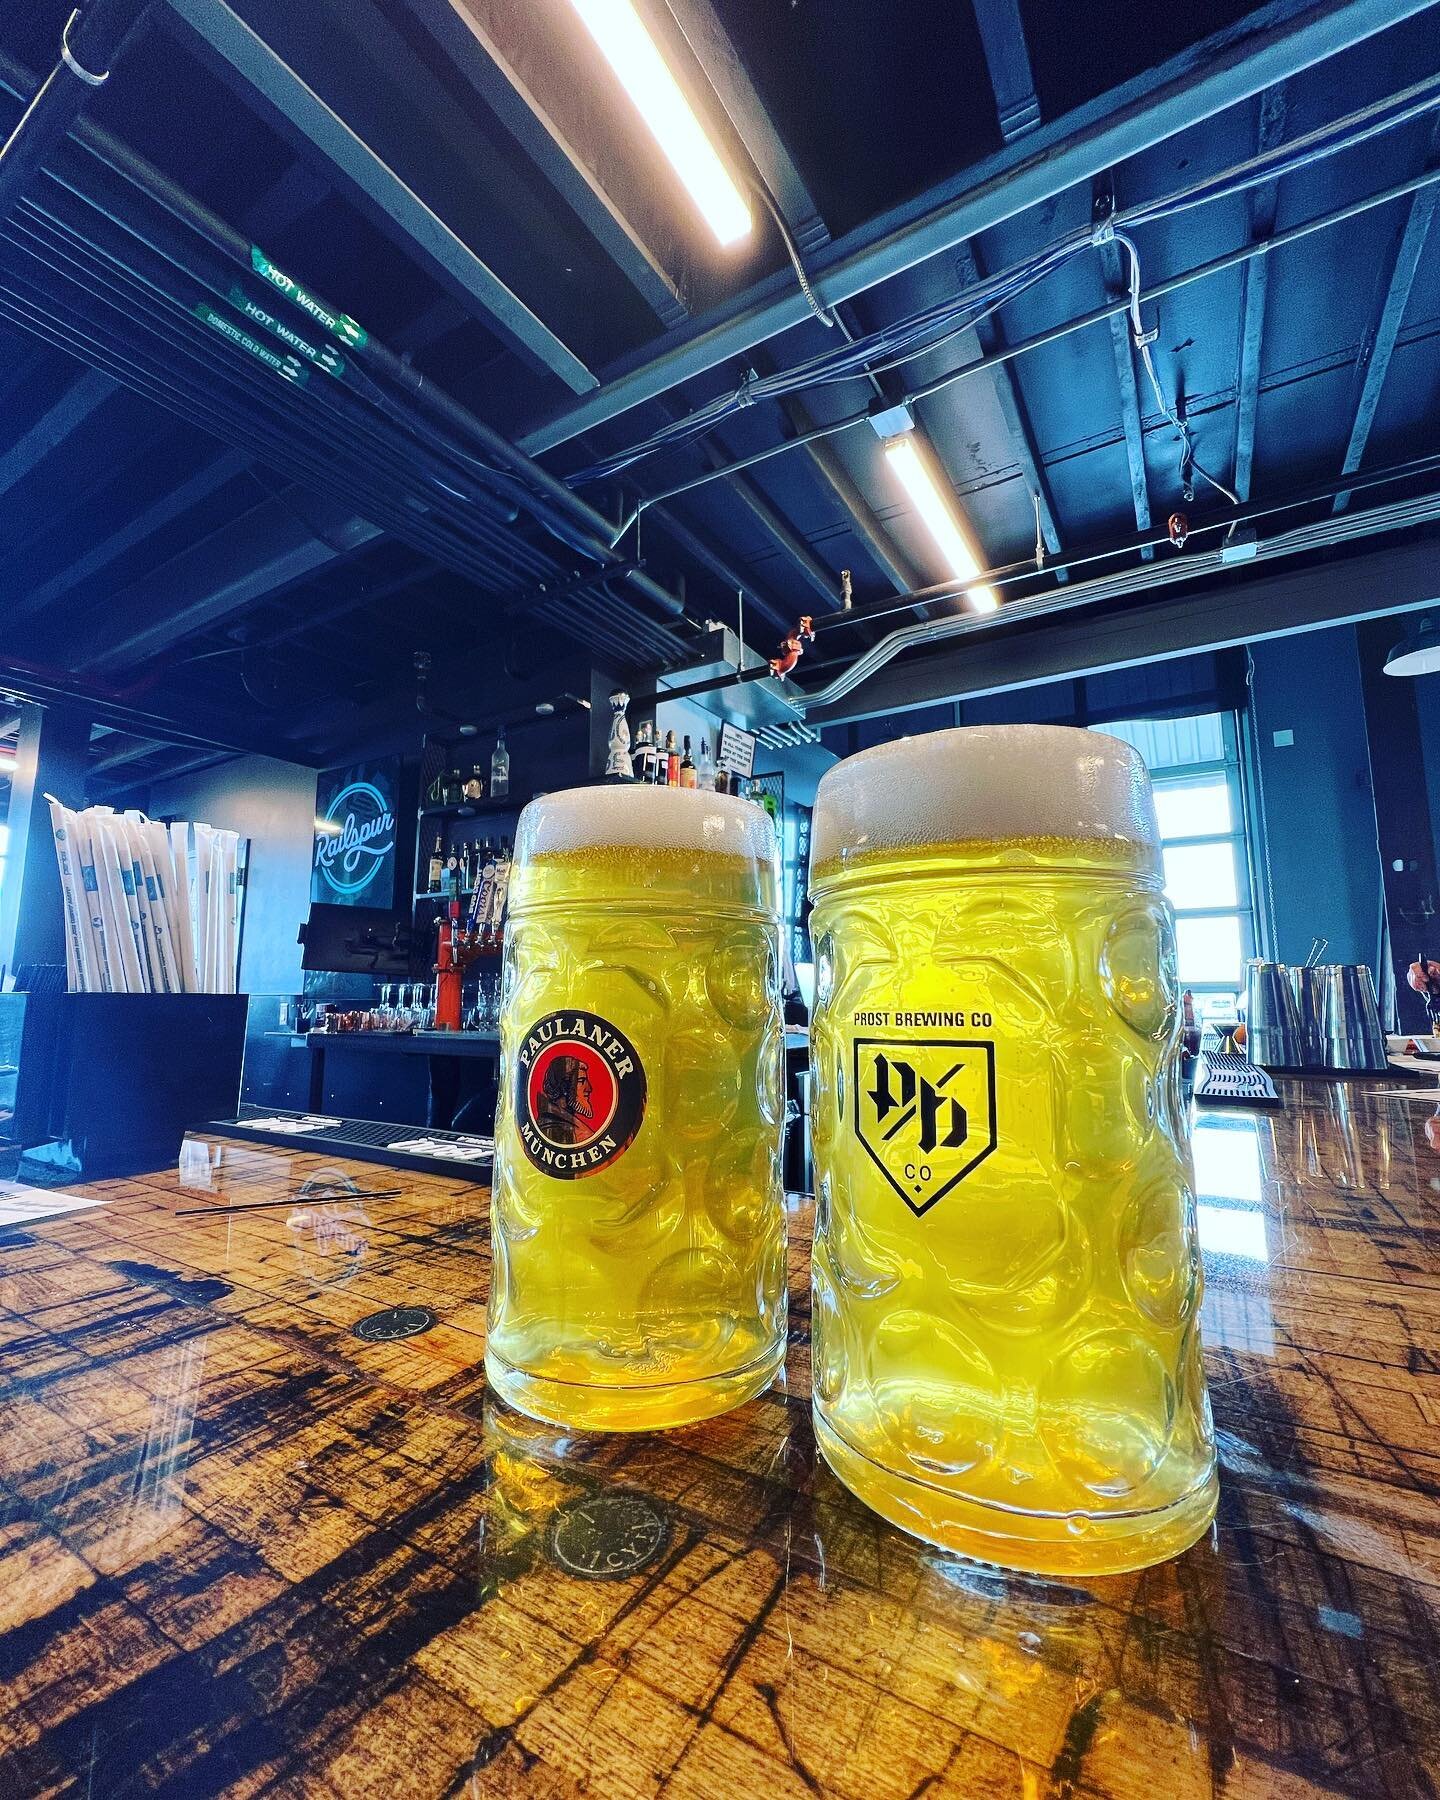 Would ya just LOOK at em?! @attherailspur is serving LITERS of @prostbrewingco and @paulaner lagers today for the Prost Tap-Takeover / German Beer Weekend!  We&rsquo;re hanging out til at least 4pm to talk shop, talk Lager, dish out high fives, liste